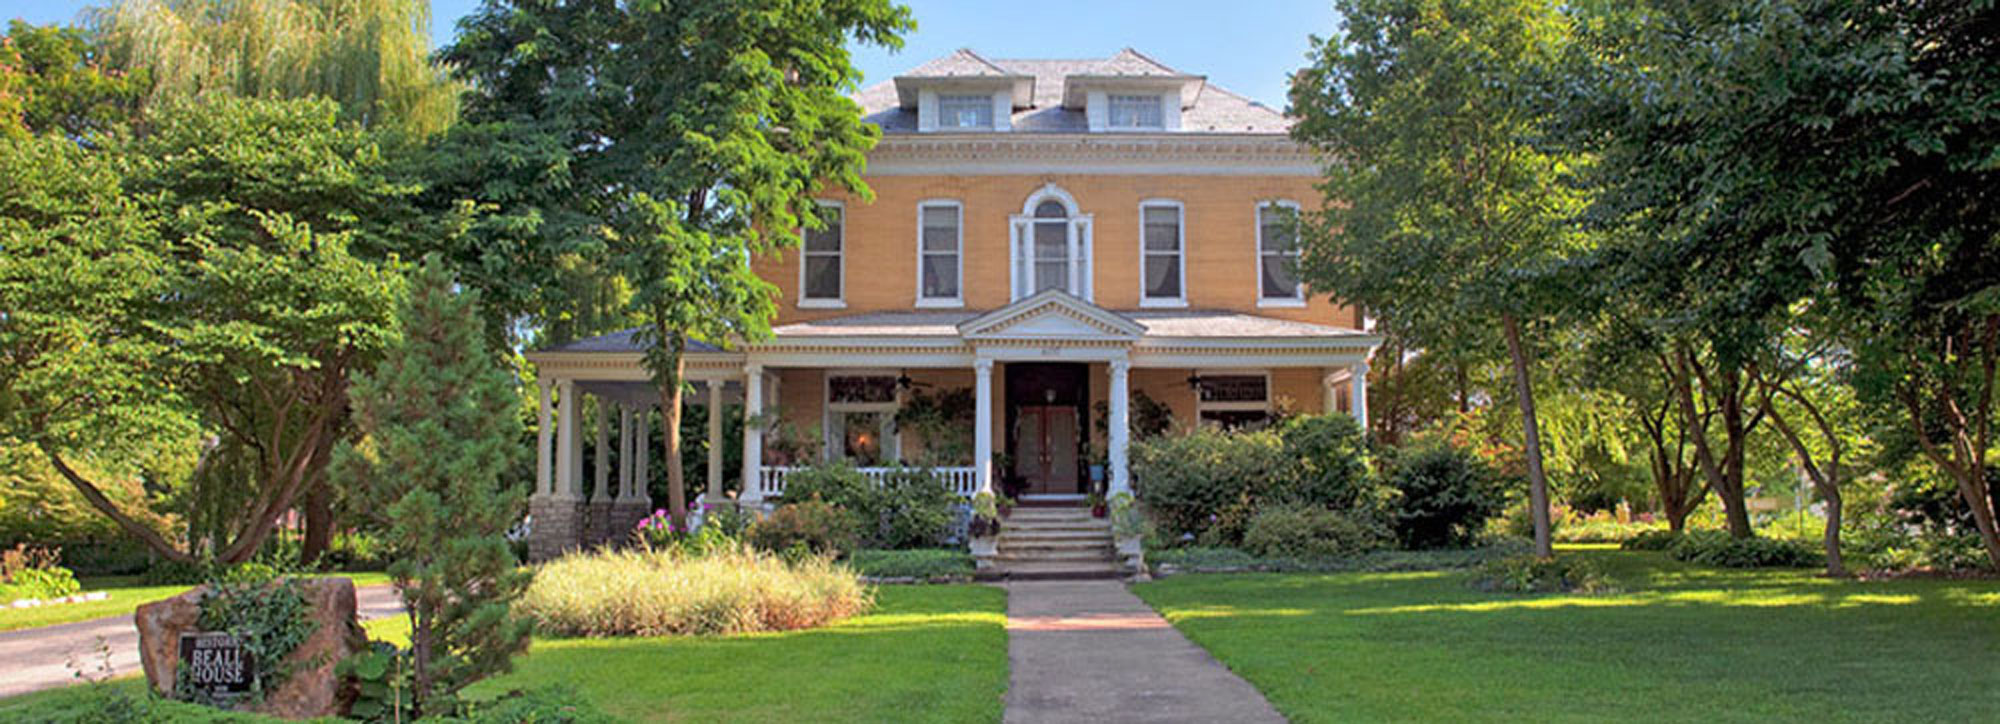 Beall Mansion Bed & Breakfast St. Louis 